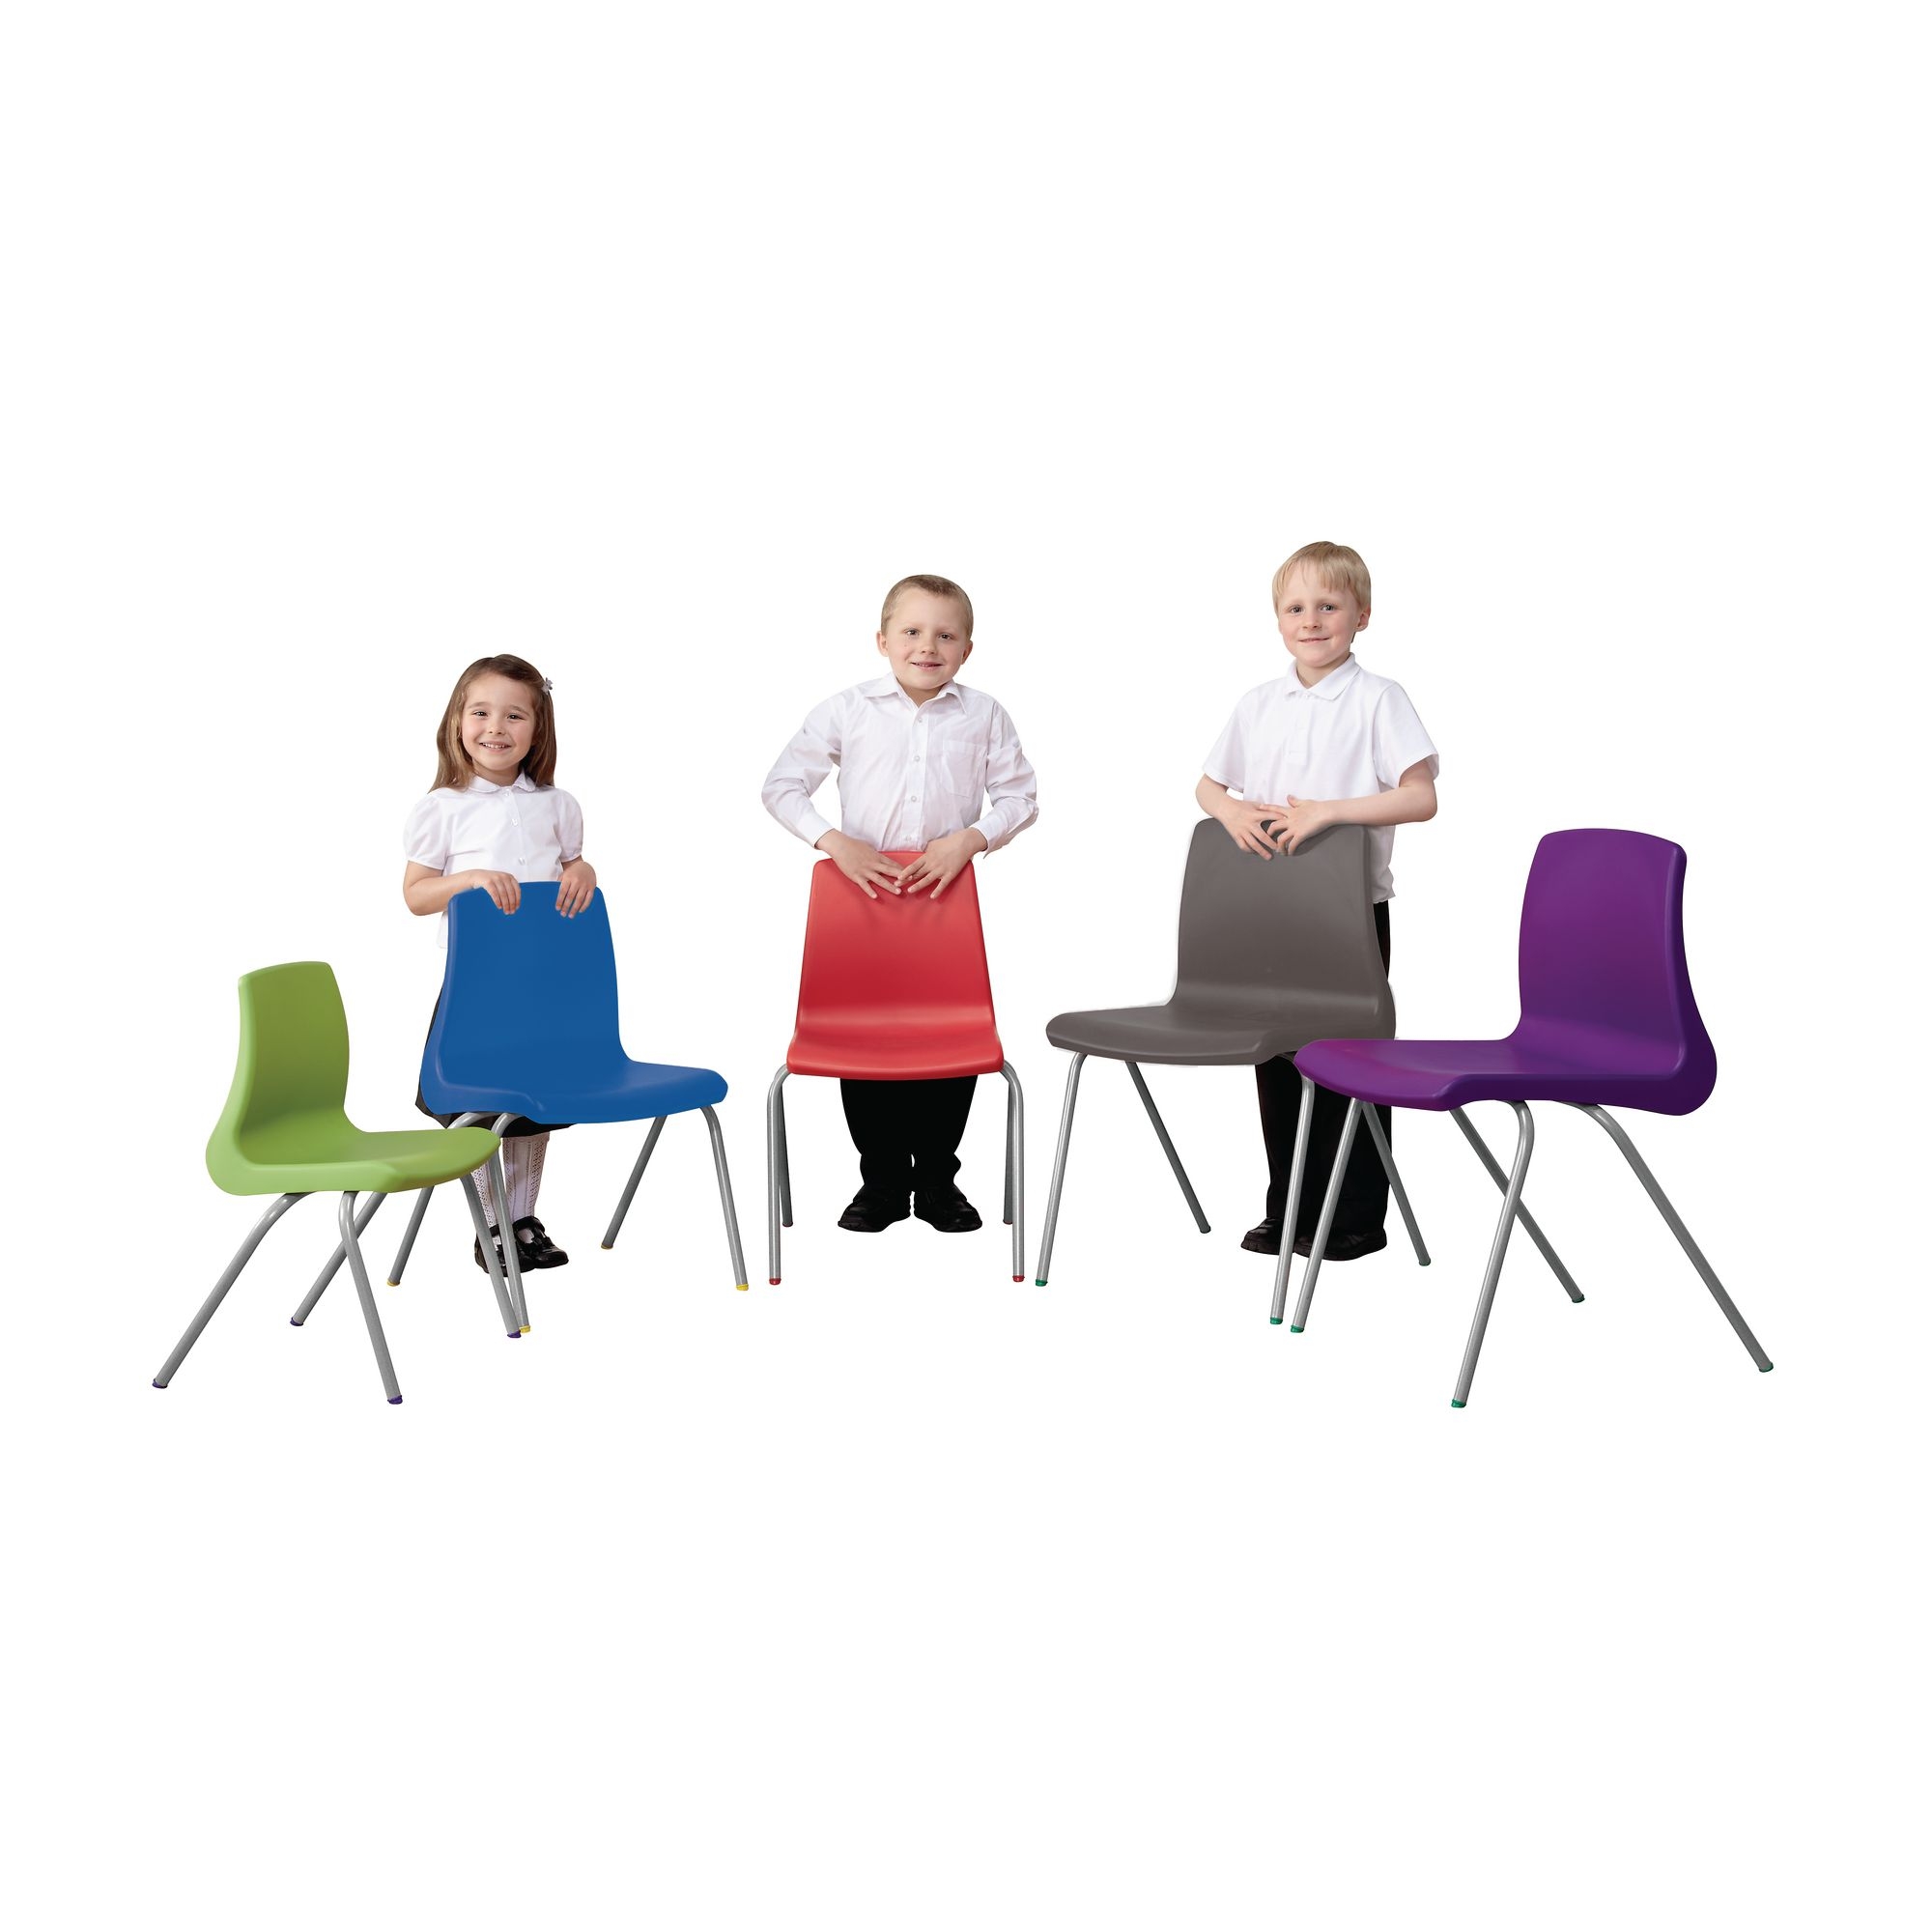 NP Chair - Size C - 350mm - Purple